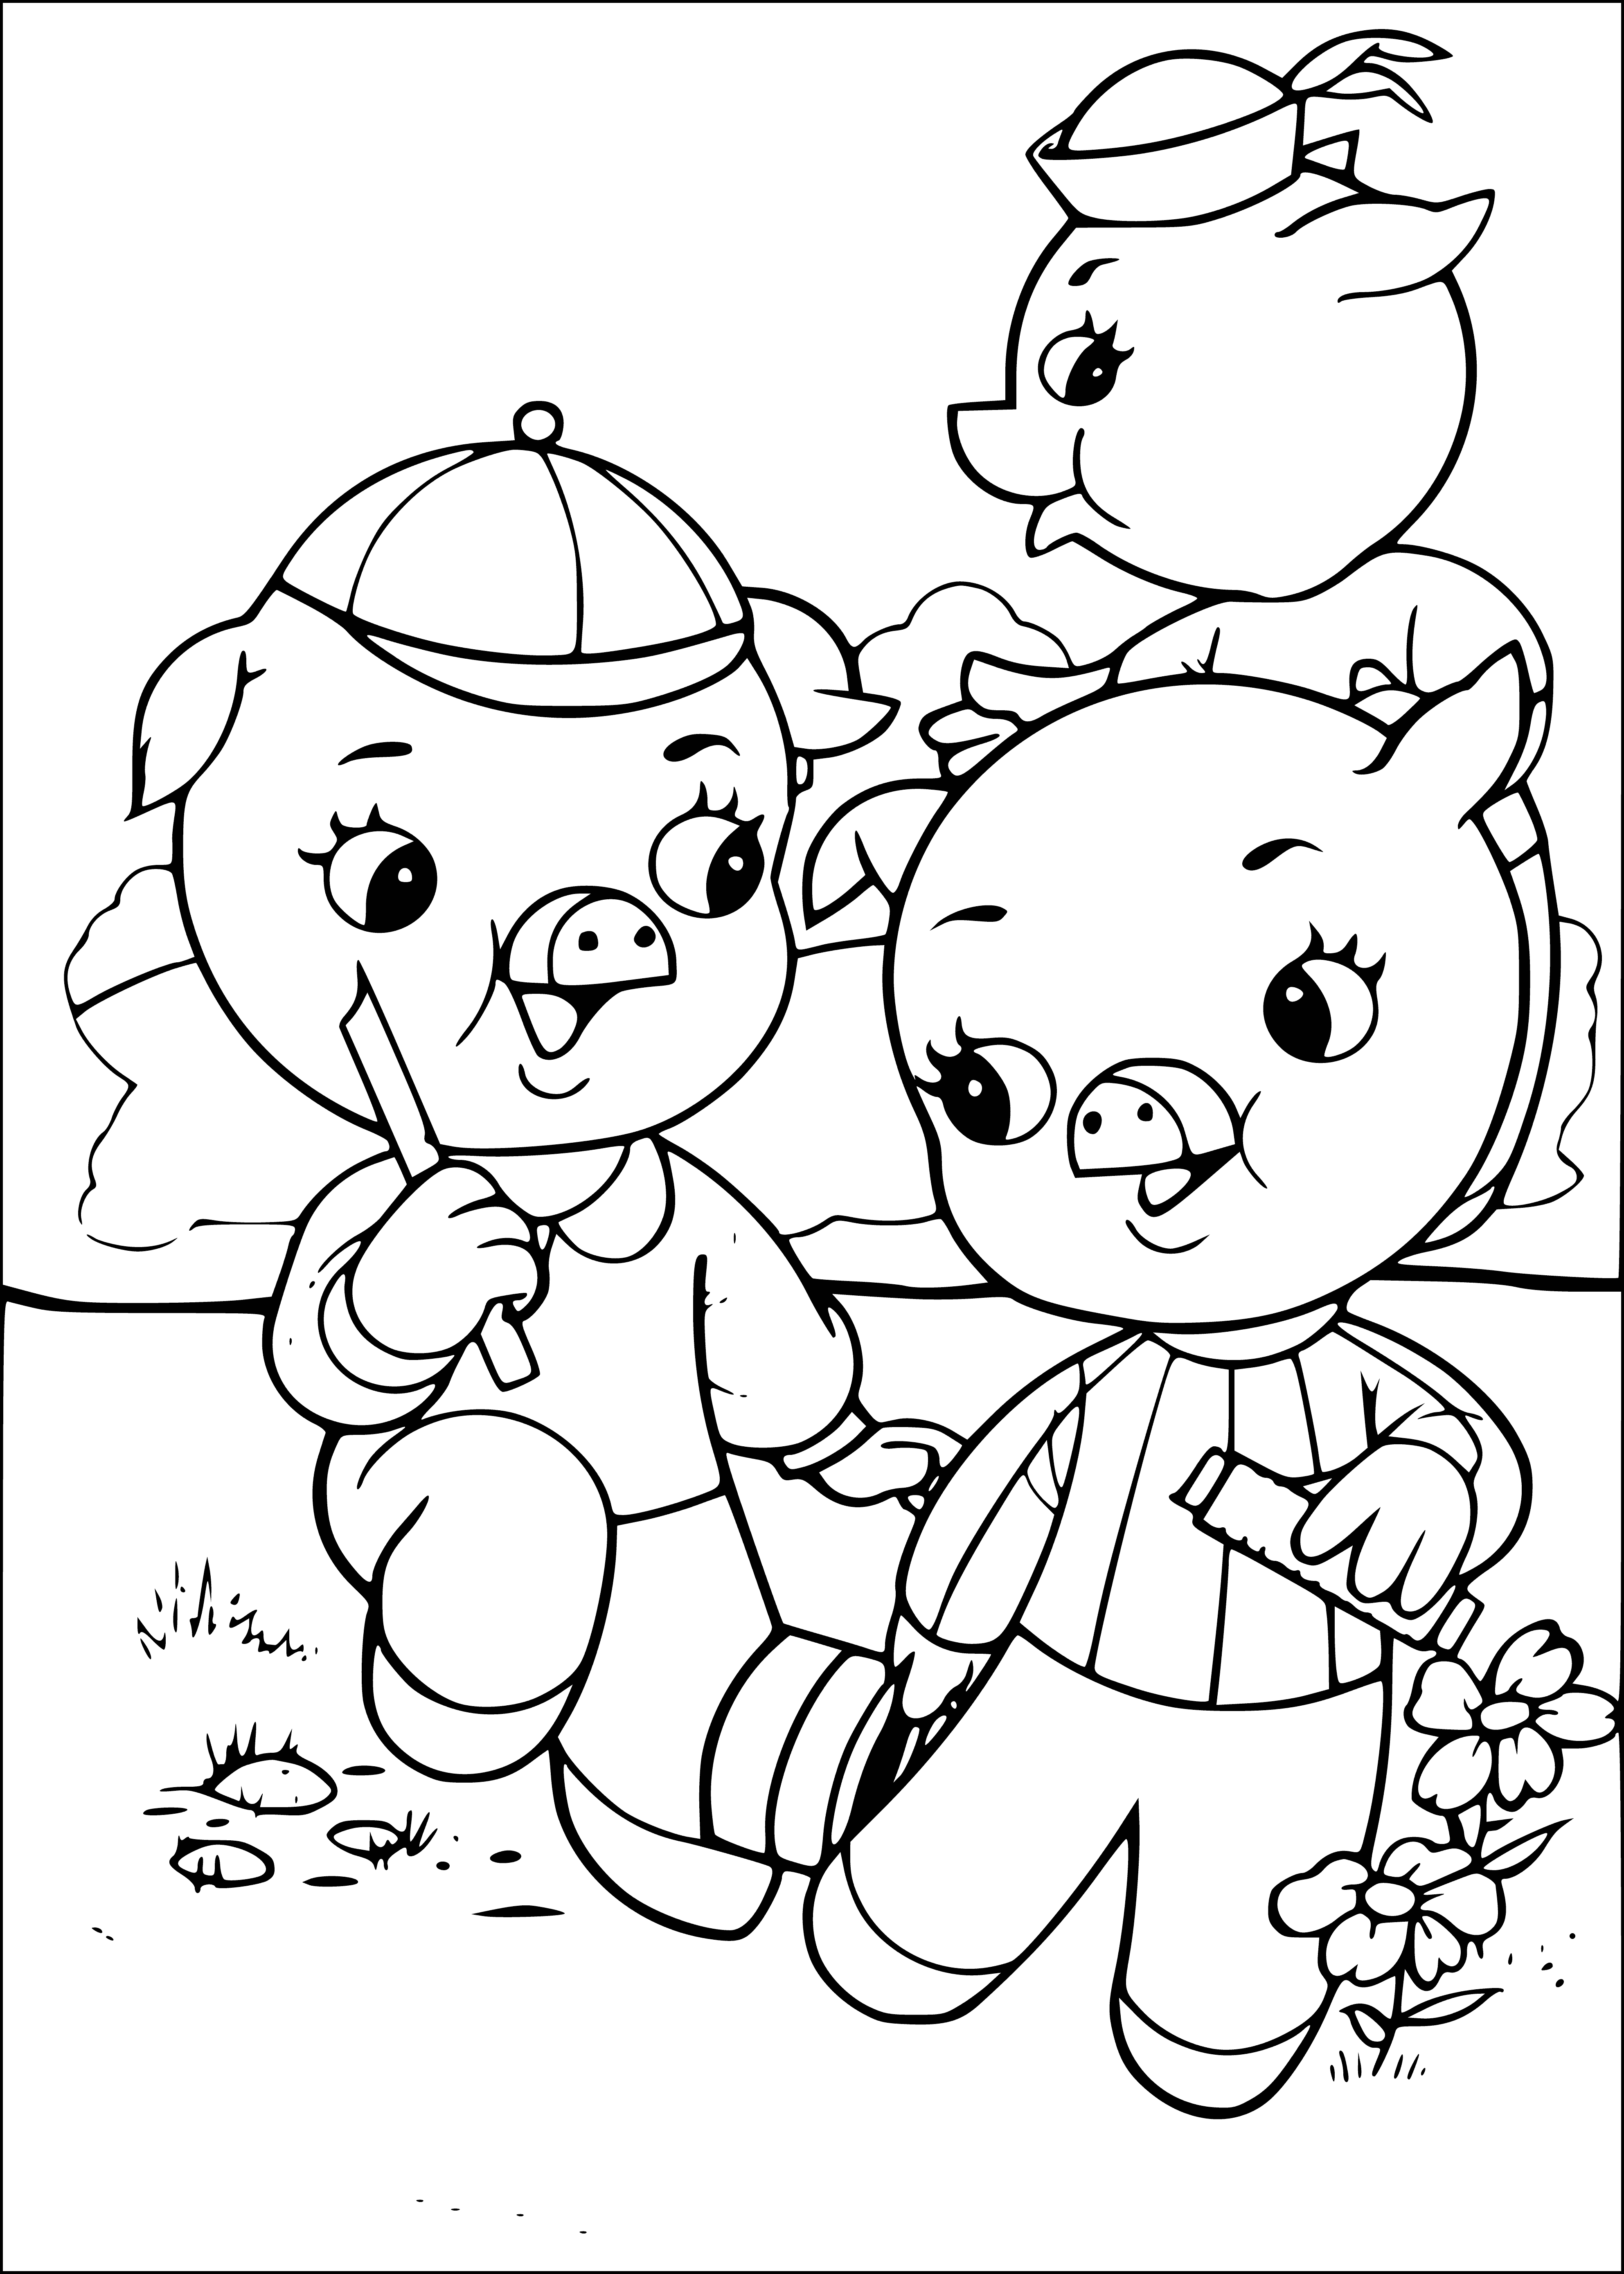 Three pigs coloring page